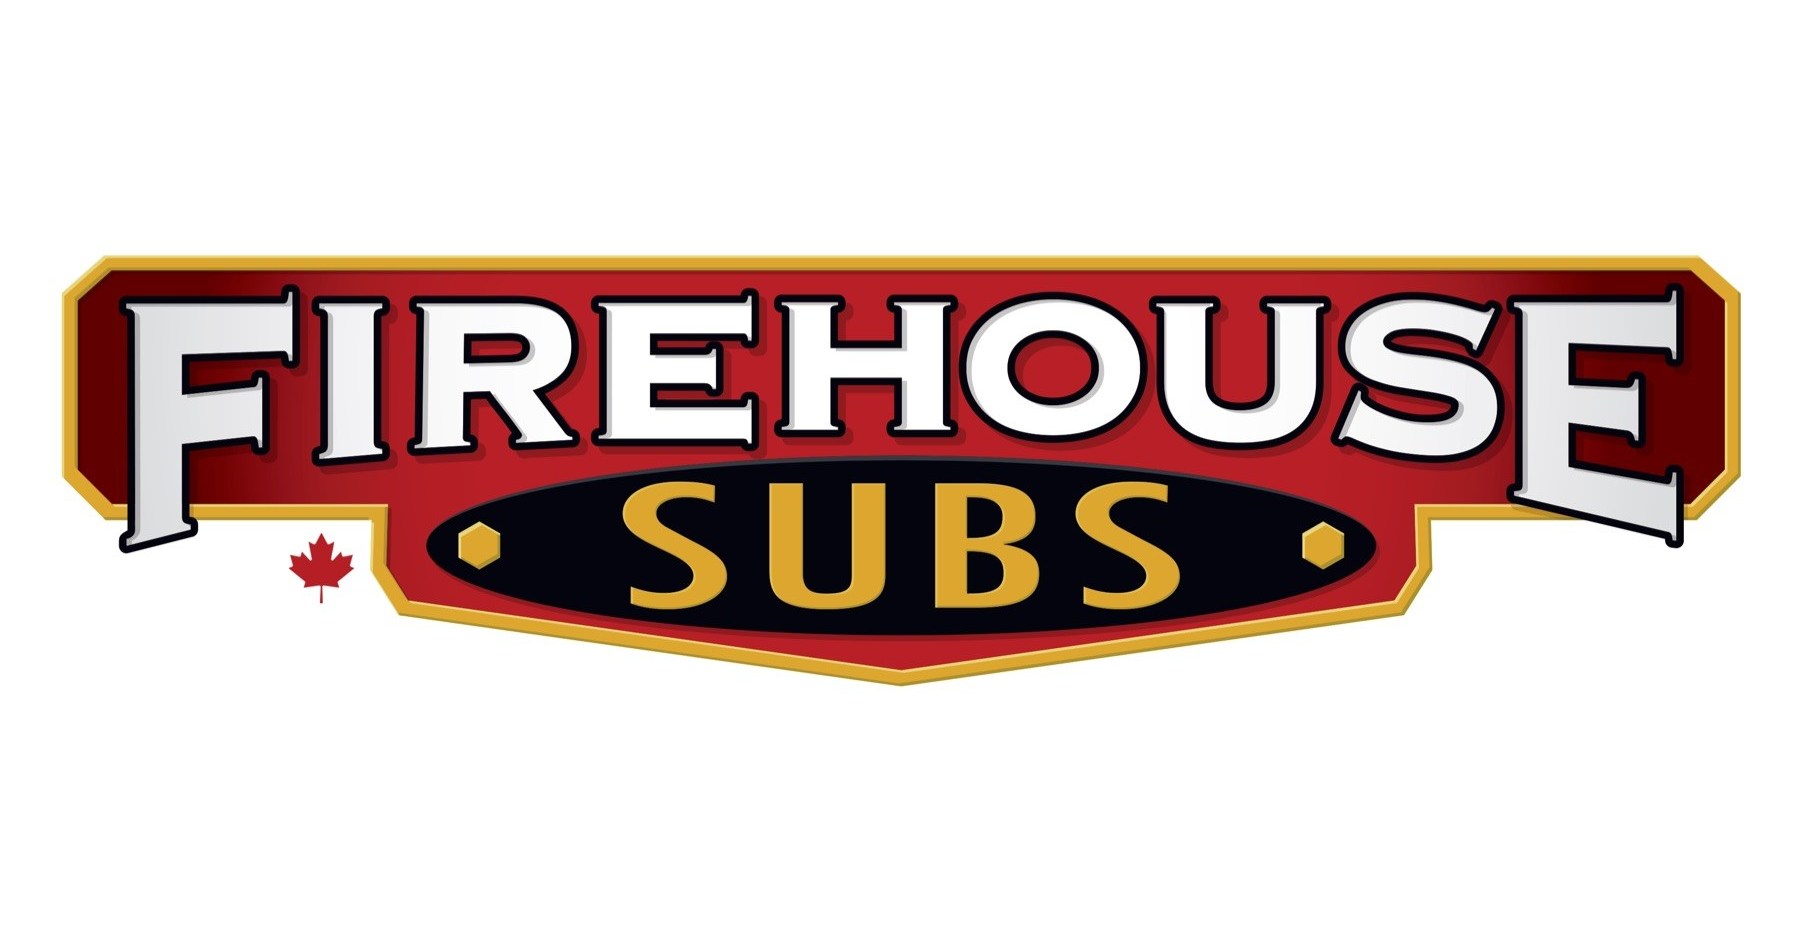 FIREHOUSE SUBS® CELEBRATES GUESTS BY NAME WITH THE LAUNCH OF "NAME OF